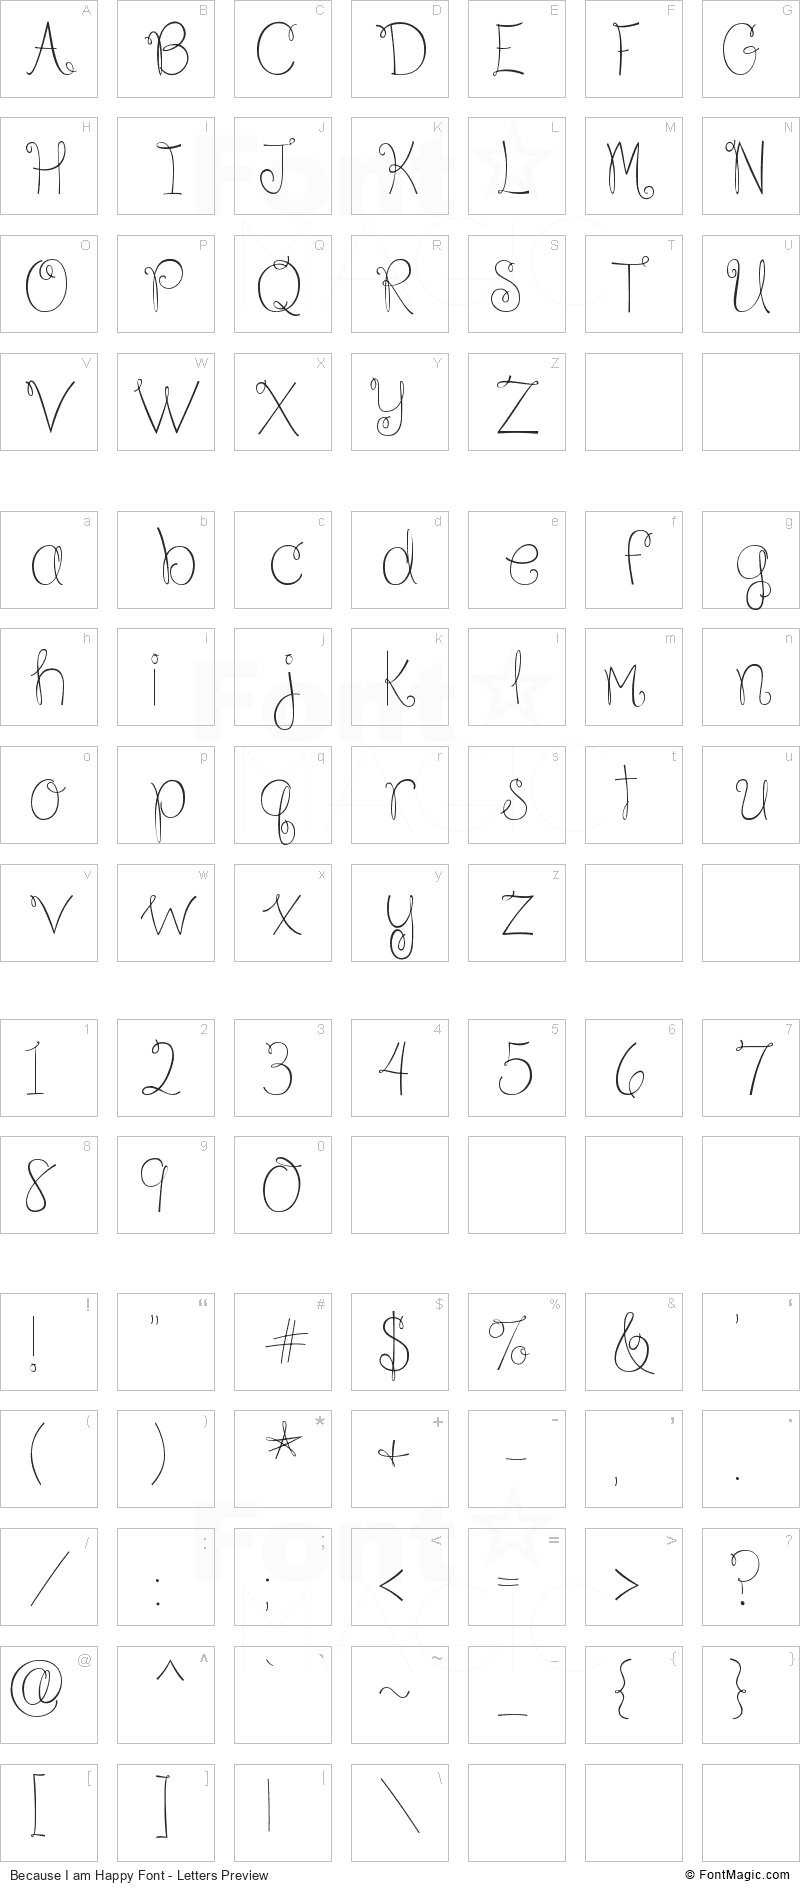 Because I am Happy Font - All Latters Preview Chart